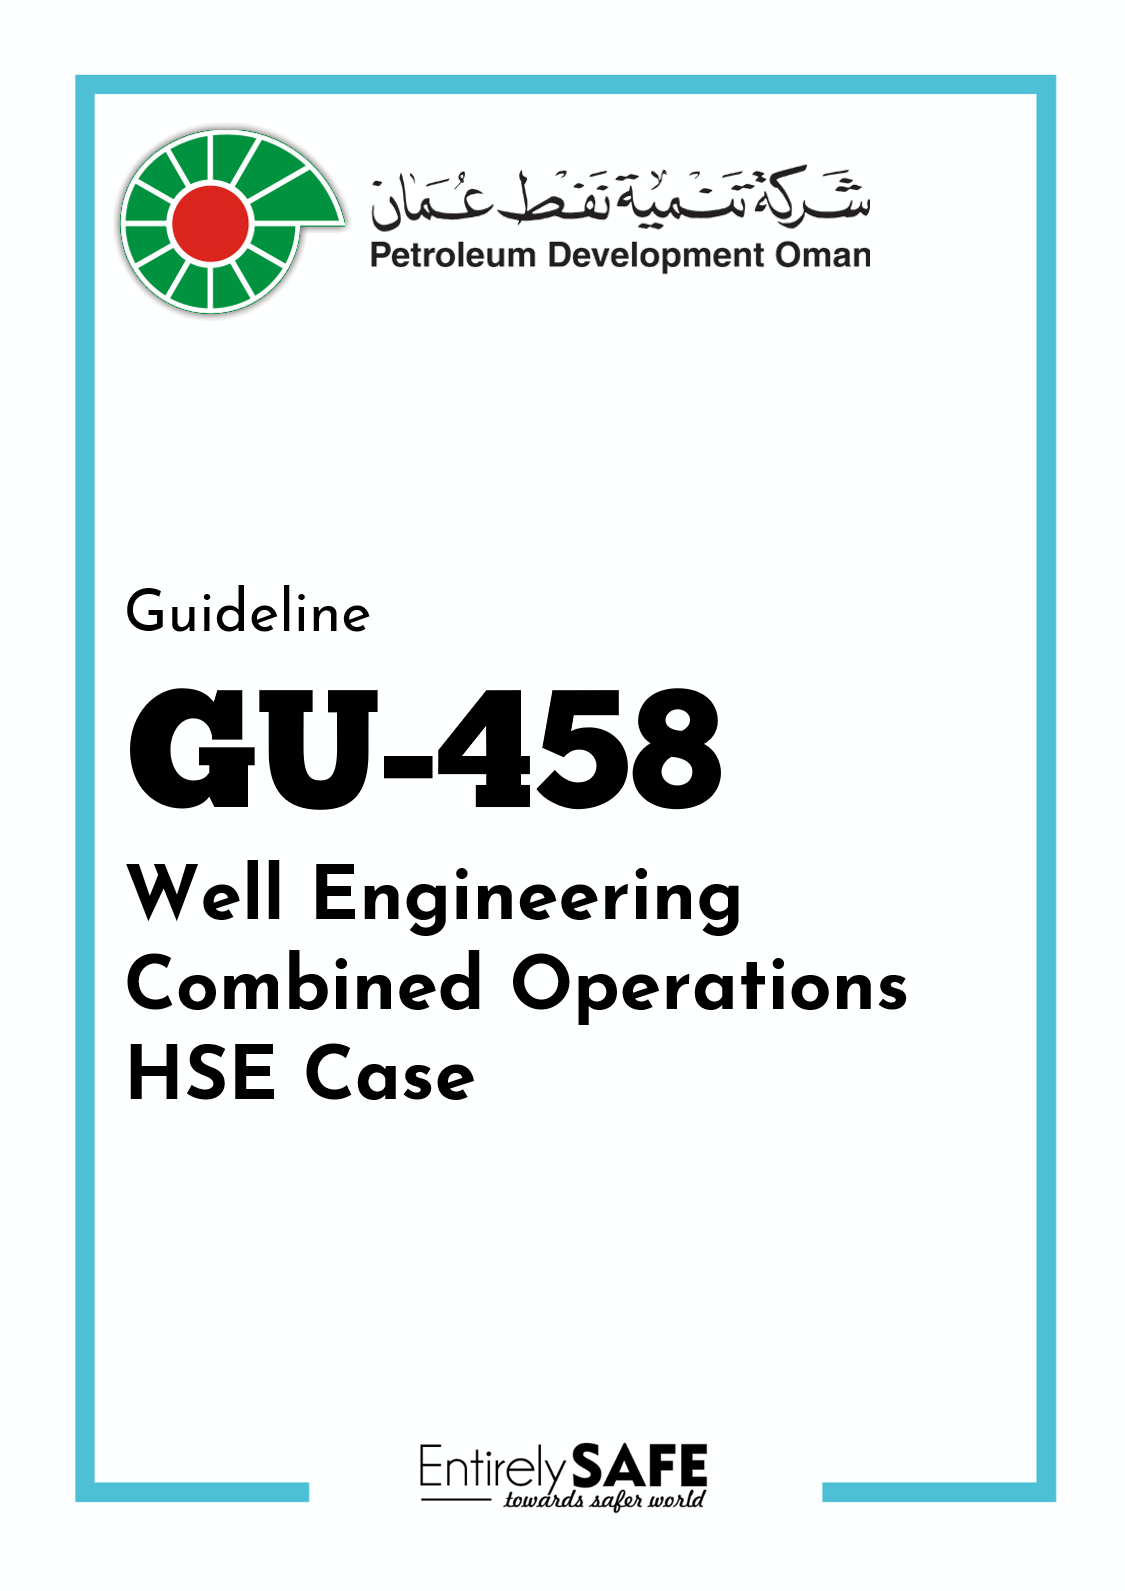 #176-GU-458-Well-Engineering-Combined-Operations-HSE-Case-PDO